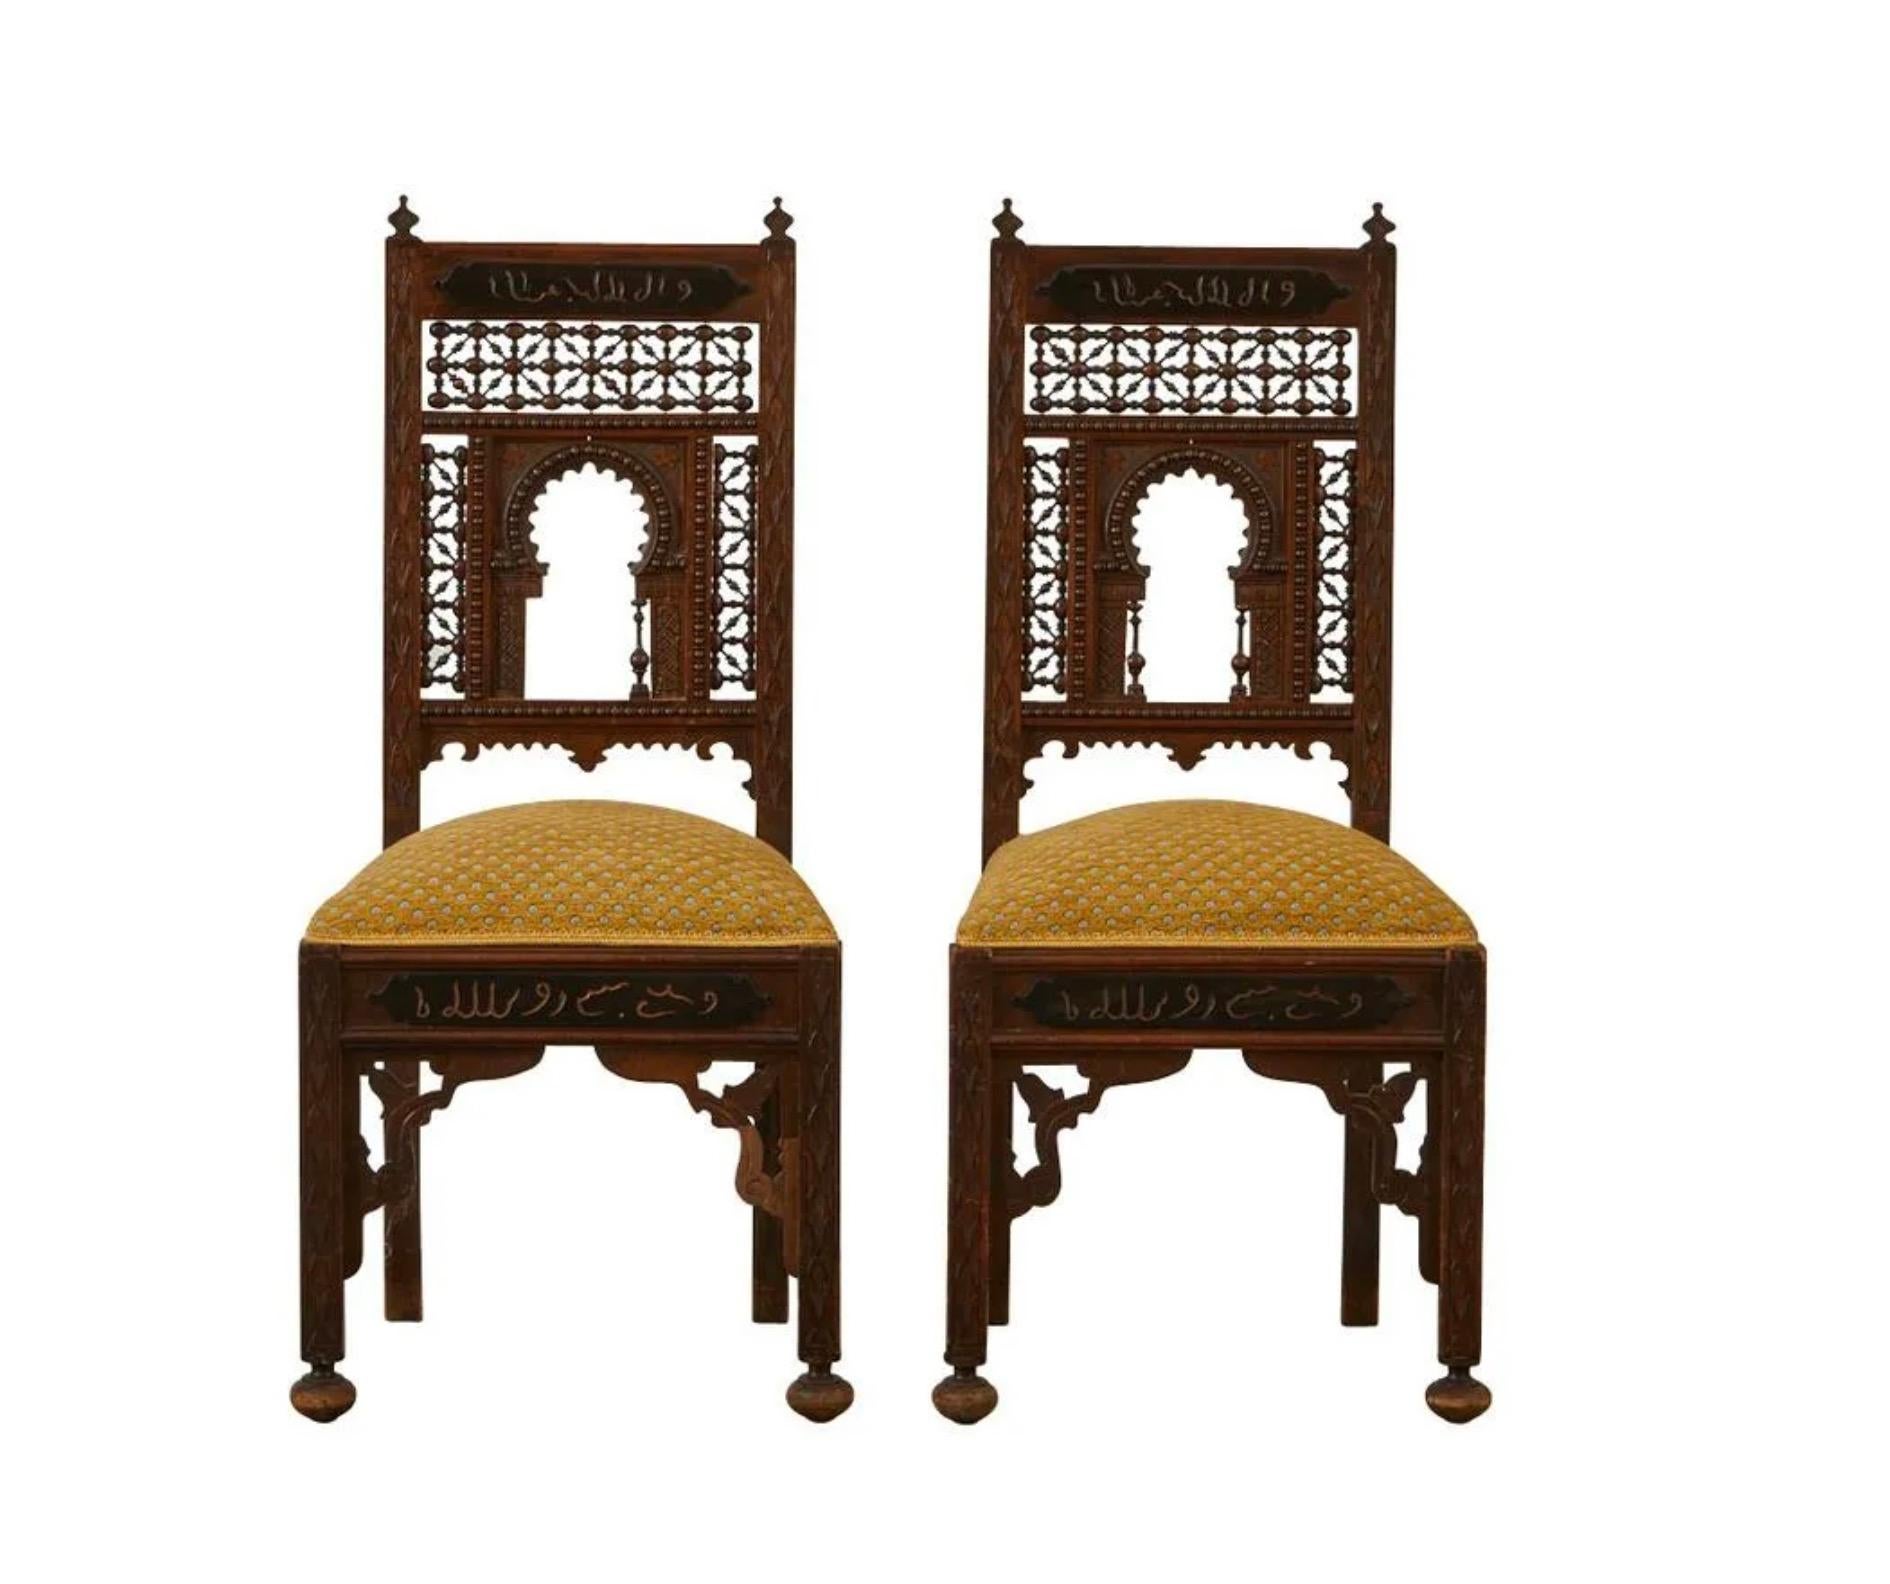 Pair of Syrian carved wood side chairs with mashrabiya style latticework backs. The back and skirting are incised with Arabic inscriptions. With upholstered seats.

Provenance: From the Estate of Horst Rechelbacher, Osceola, Wisconsin.

Horst